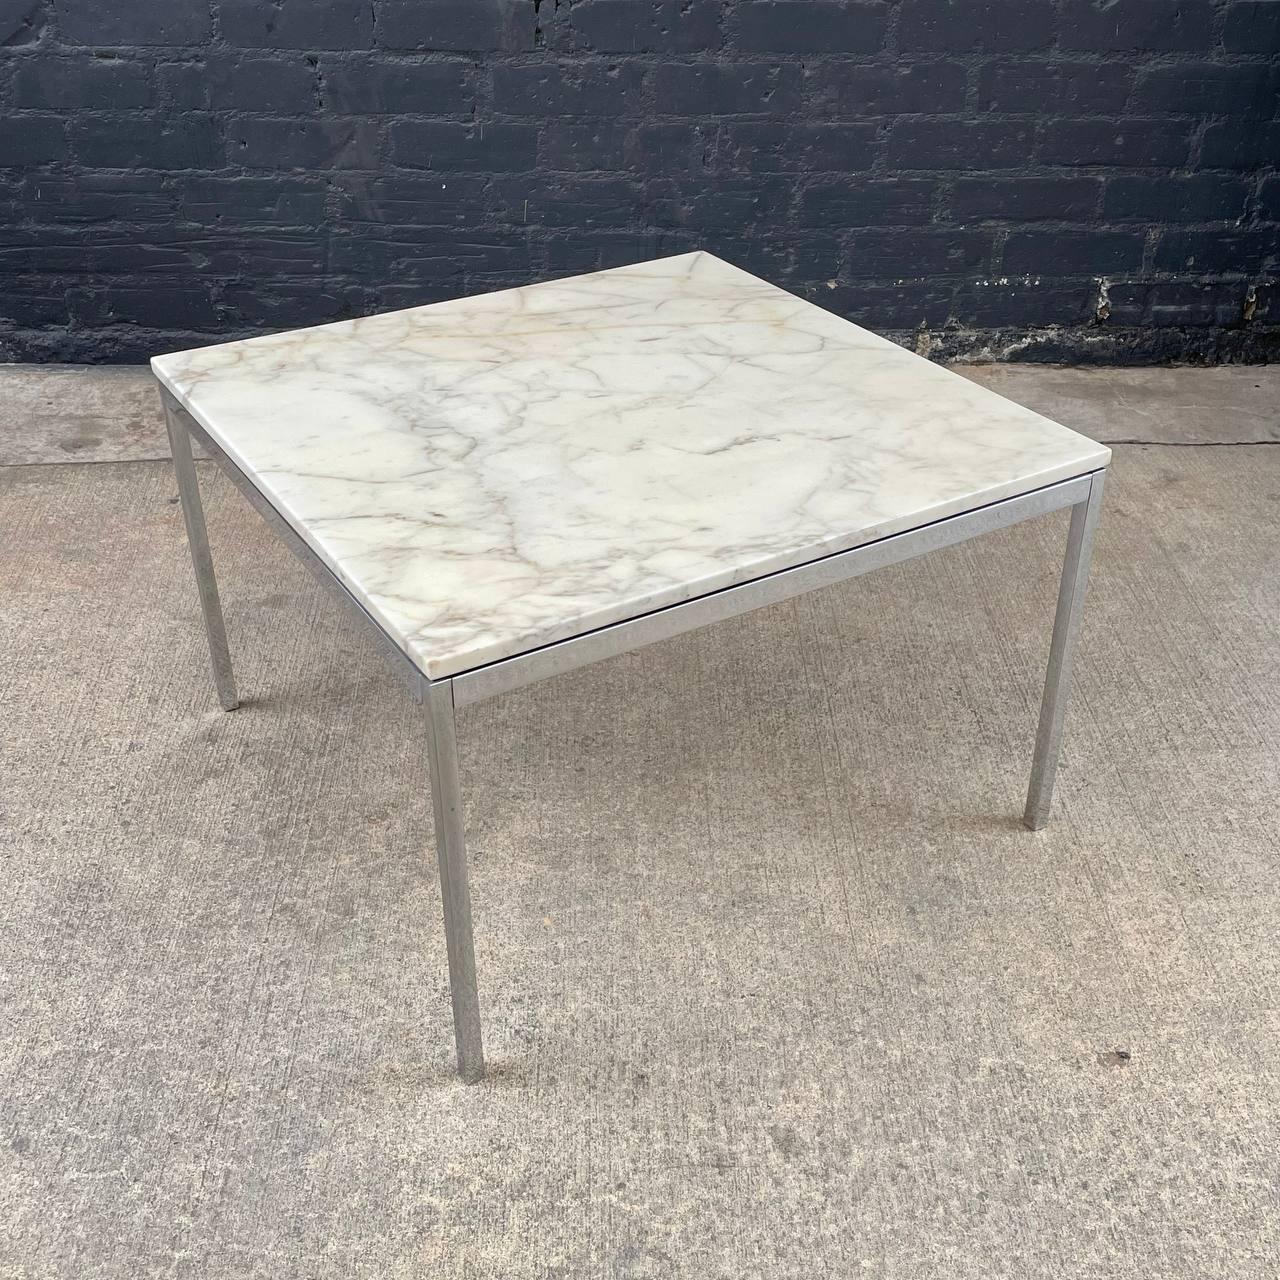 American Signed Original Mid-Century Modern Carrara Marble Coffee Table by Knoll For Sale